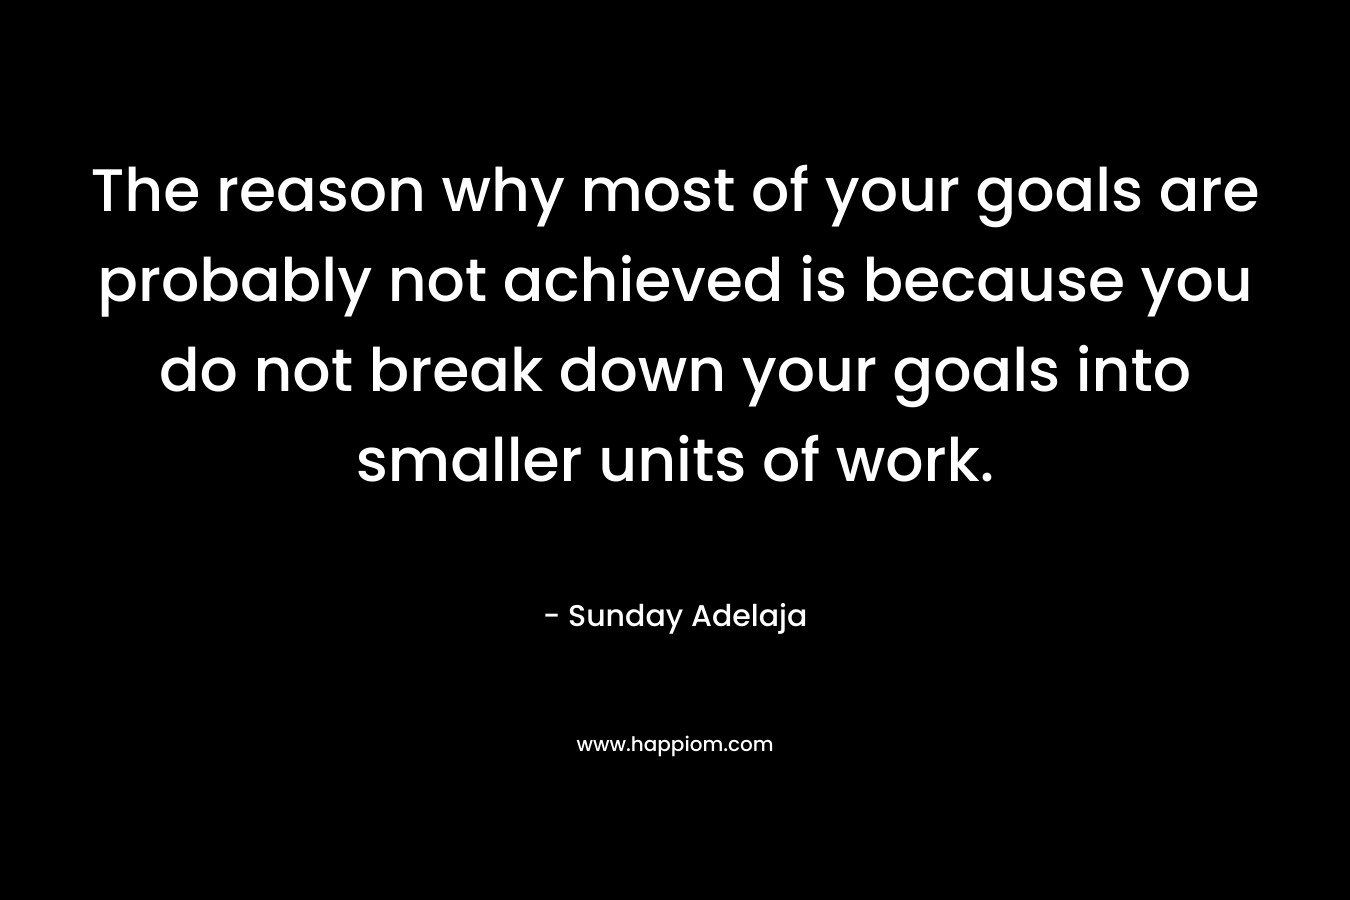 The reason why most of your goals are probably not achieved is because you do not break down your goals into smaller units of work.